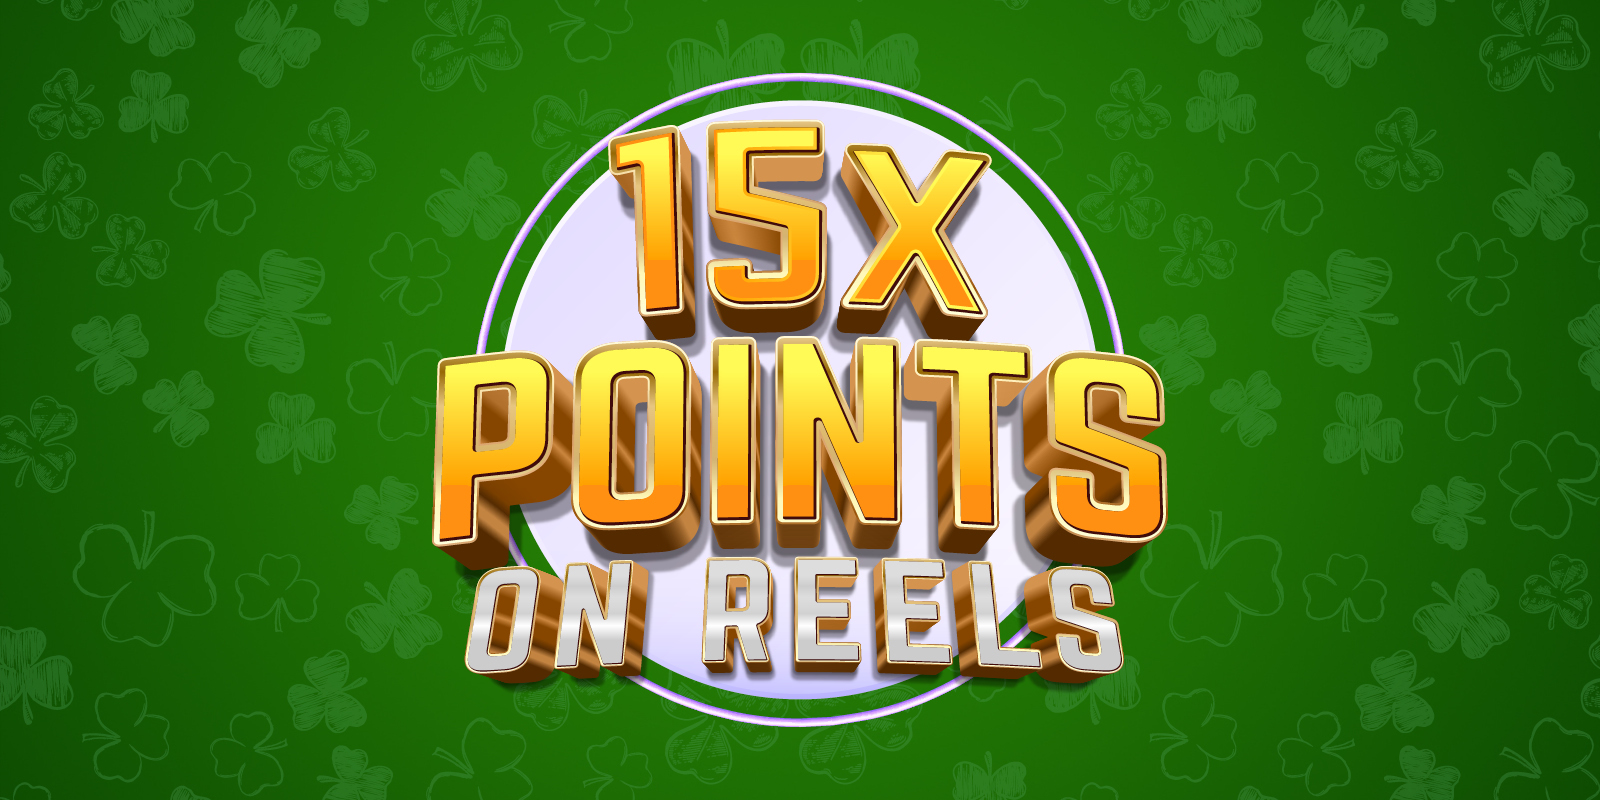 15X Points On Reels with clovers and a gold theme